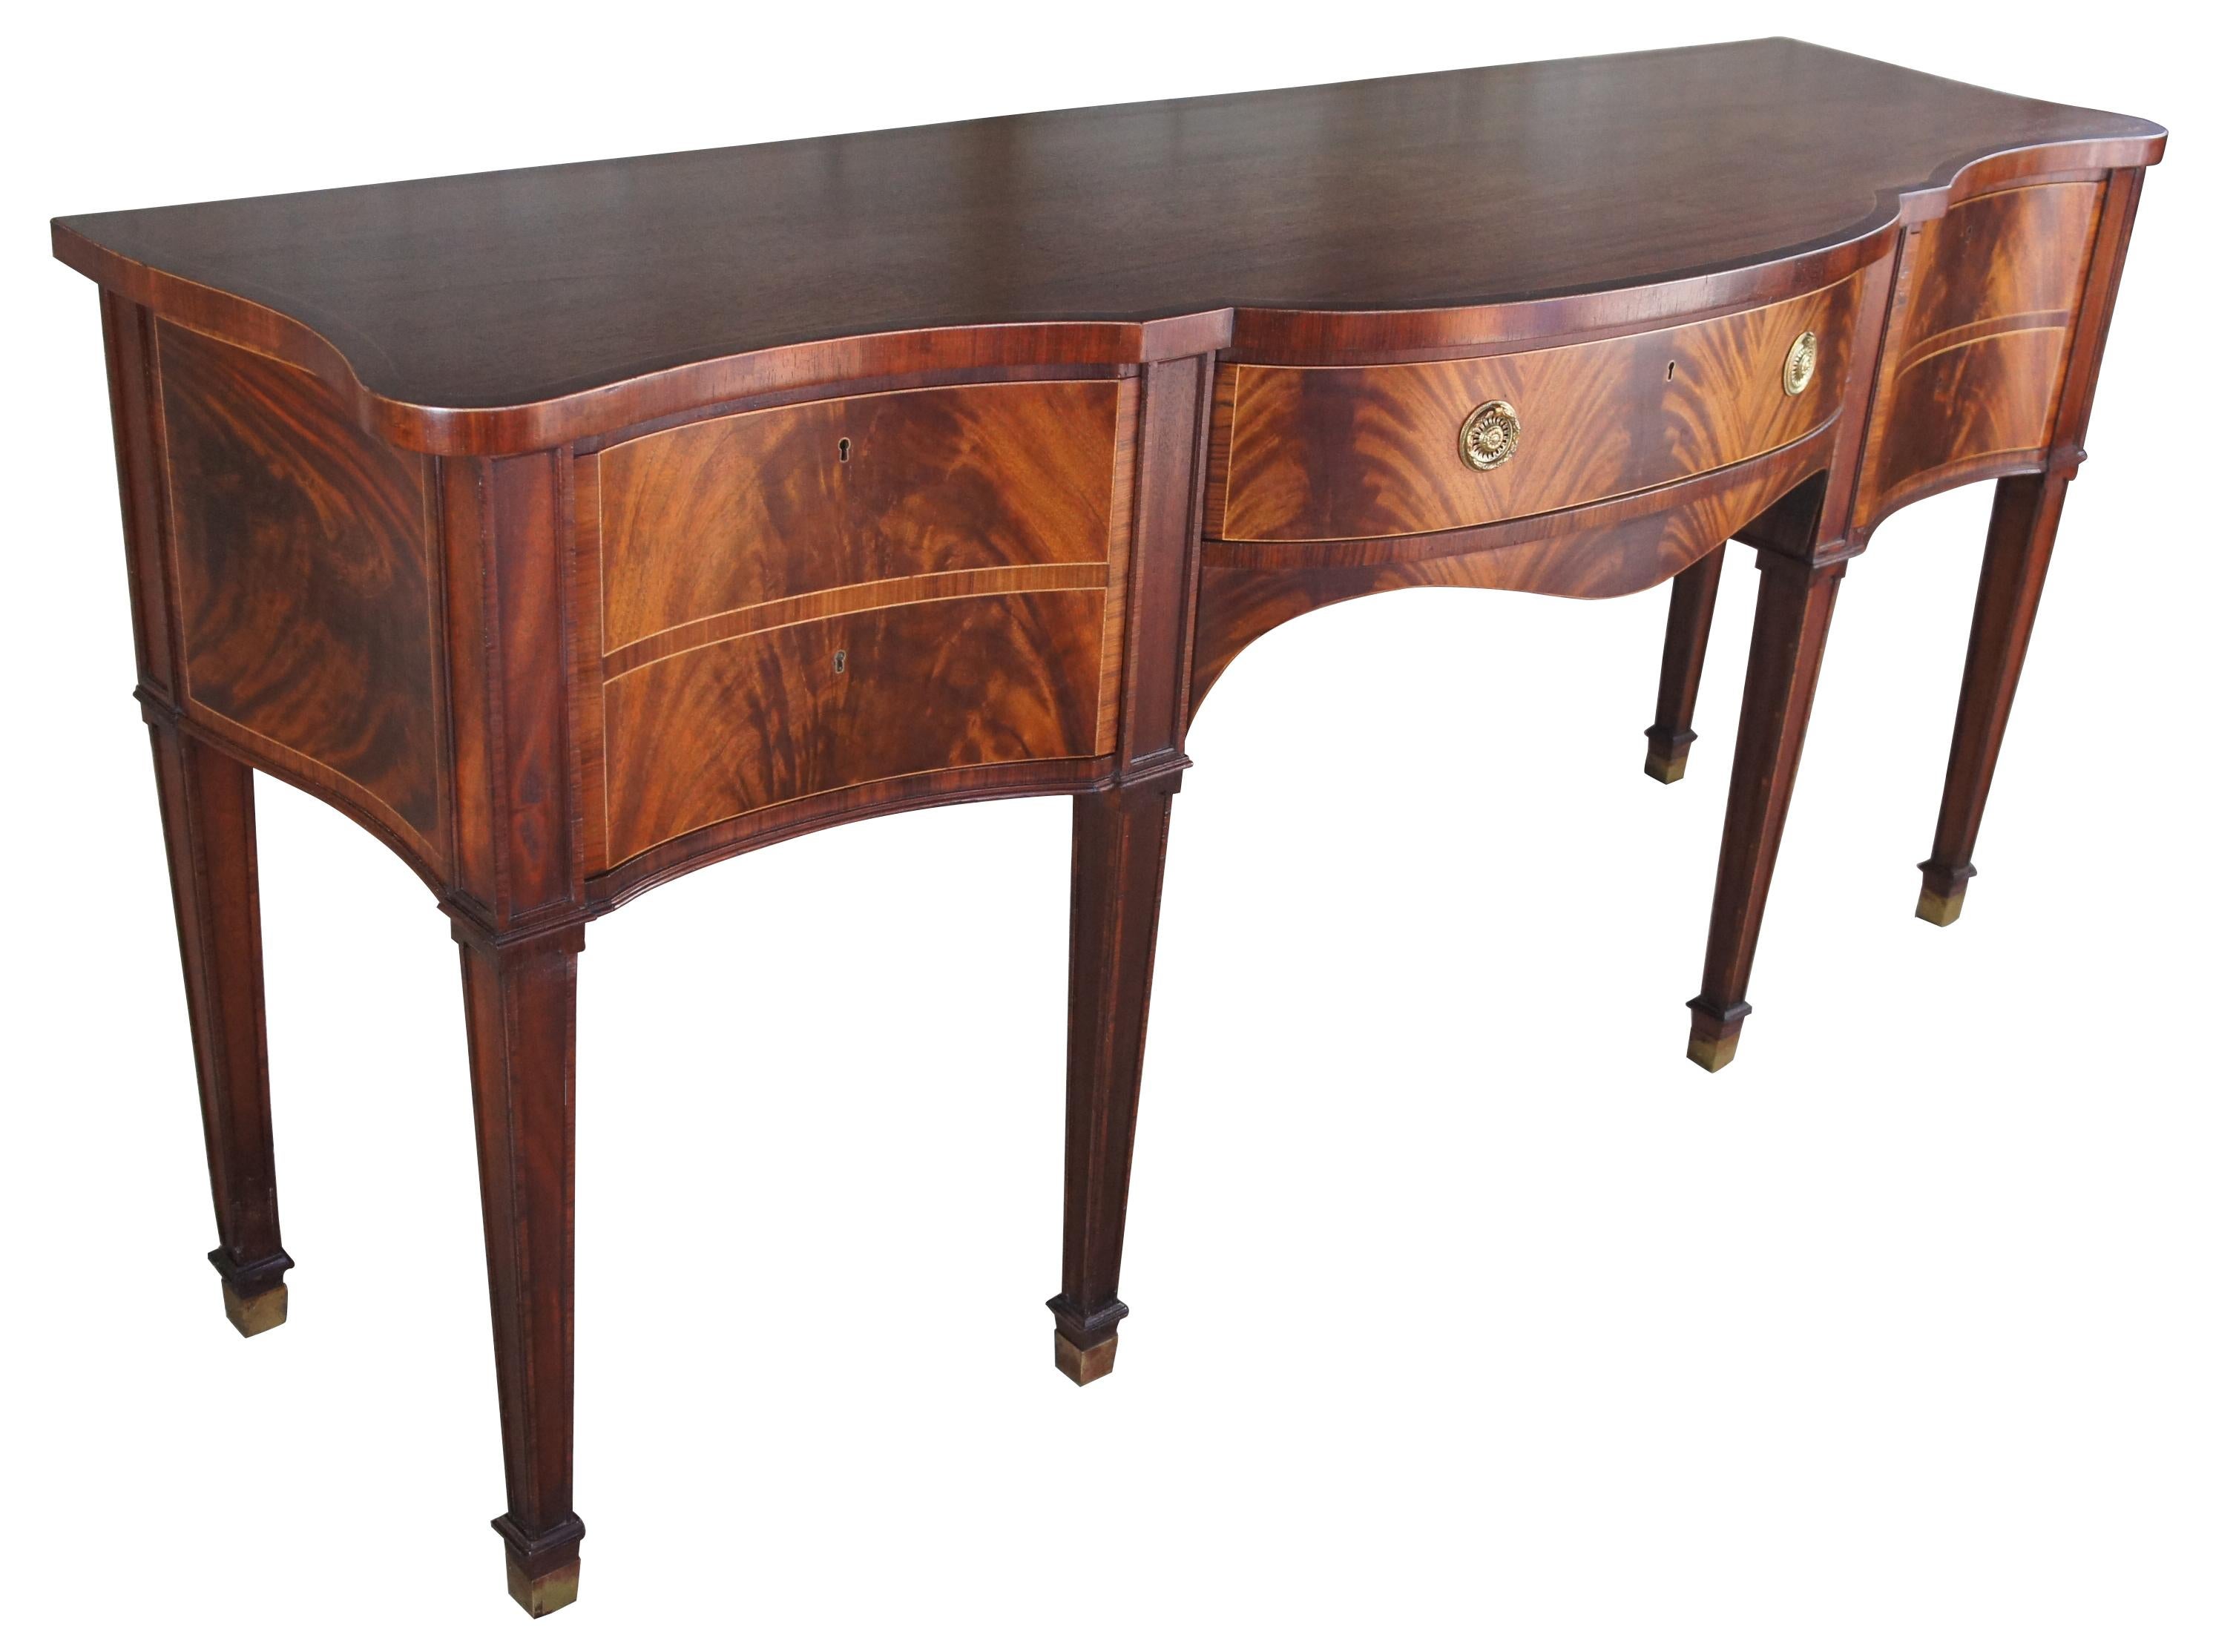 Baker Stately Homes flamed mahogany sideboard serpentine buffet Sheraton style

Shaped banded mahogany top with string inlay, single central drawer with single deep drawer either side, tapered legs. Center drawer with paper label ''Stately Homes